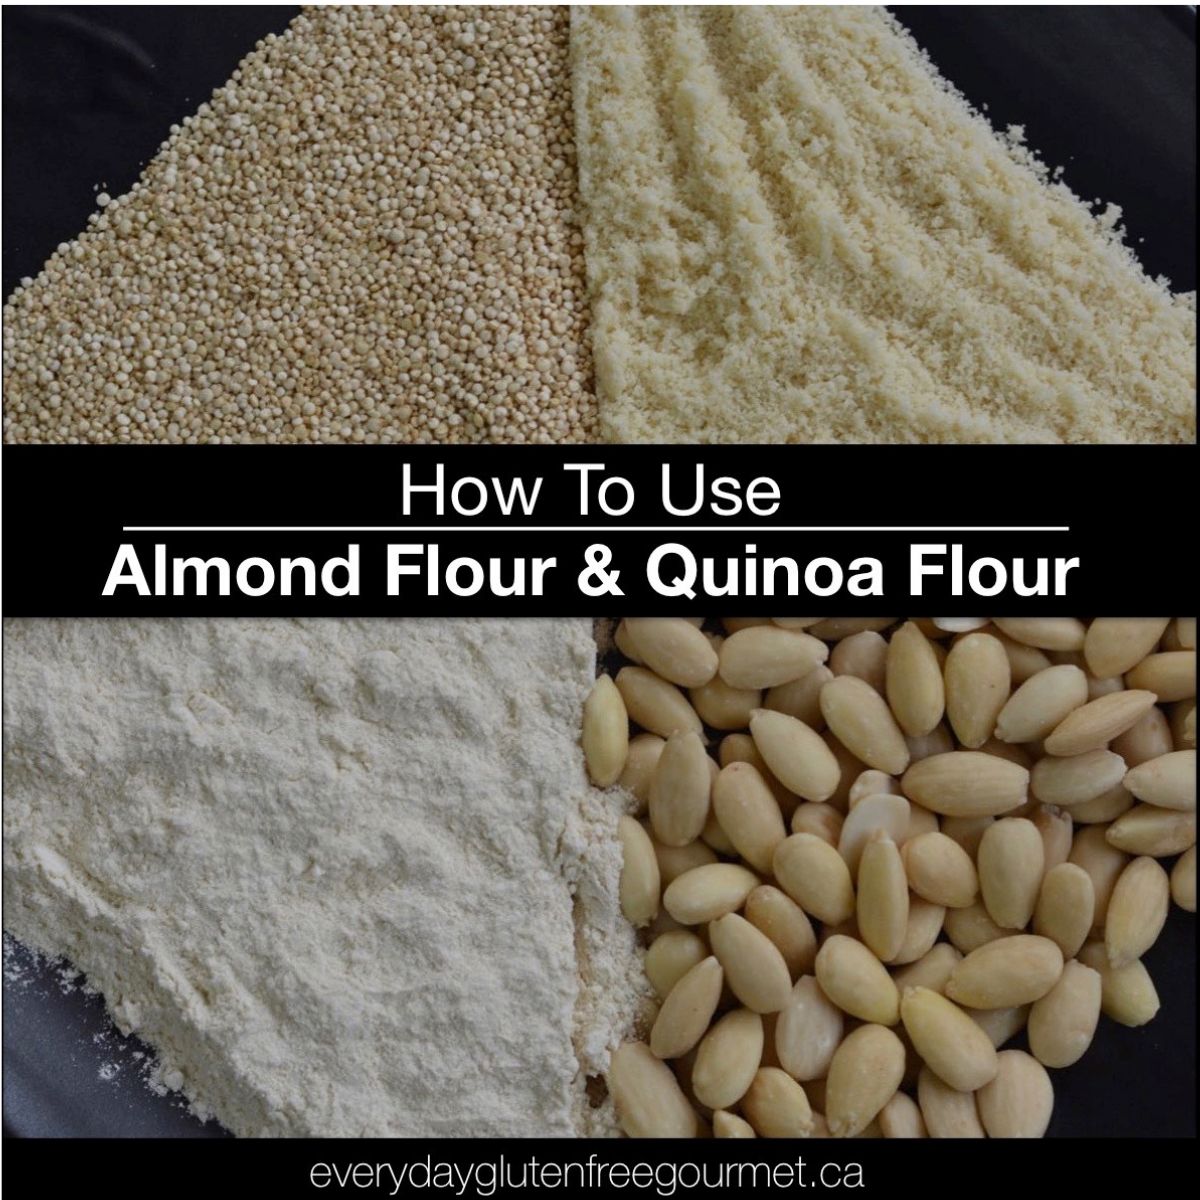 How to use almond flour and quinoa flour explains the properties and best uses of these flours. It's part of a 12-post series to help you learn more about flour and improve your baking. 